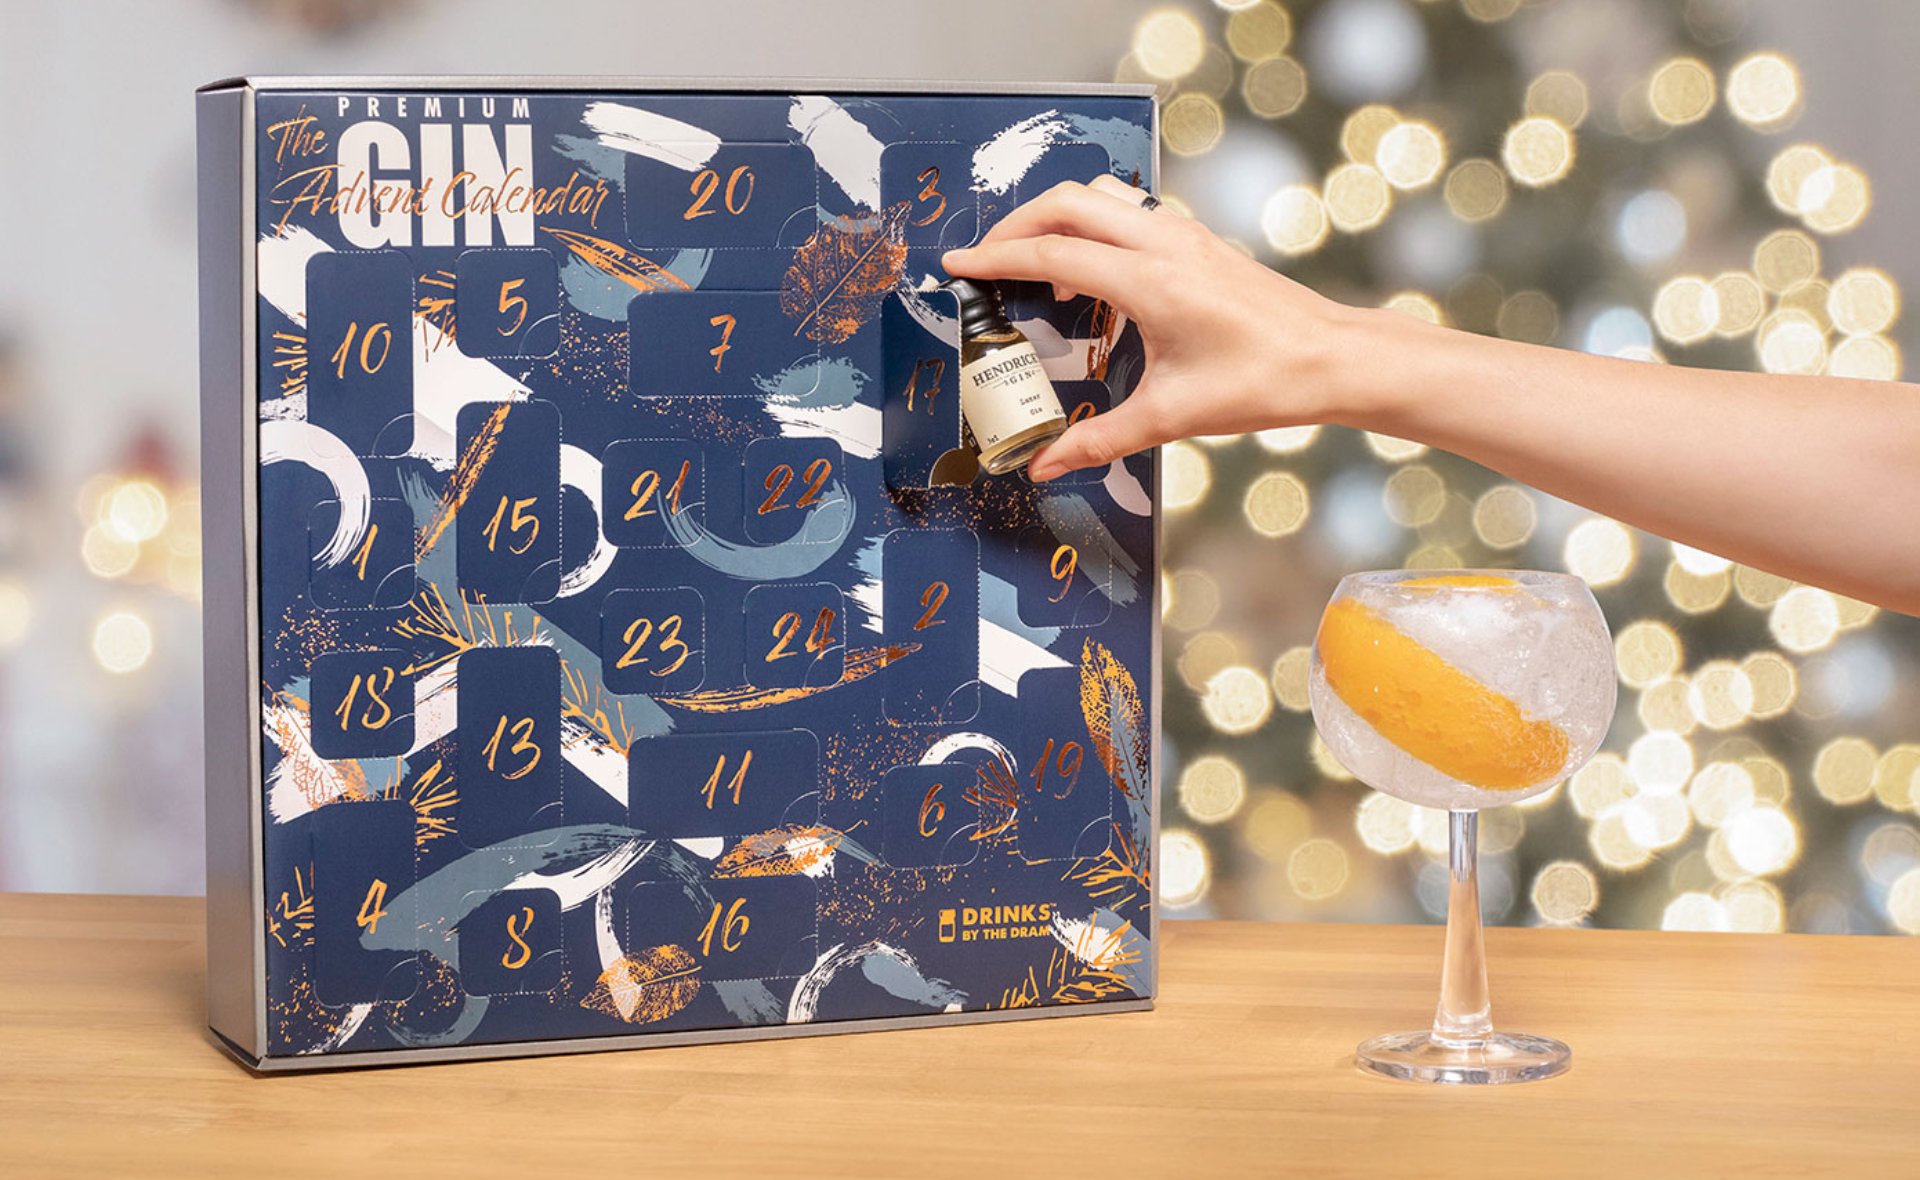 Count down to Christmas with the best gin advent calendars in Australia